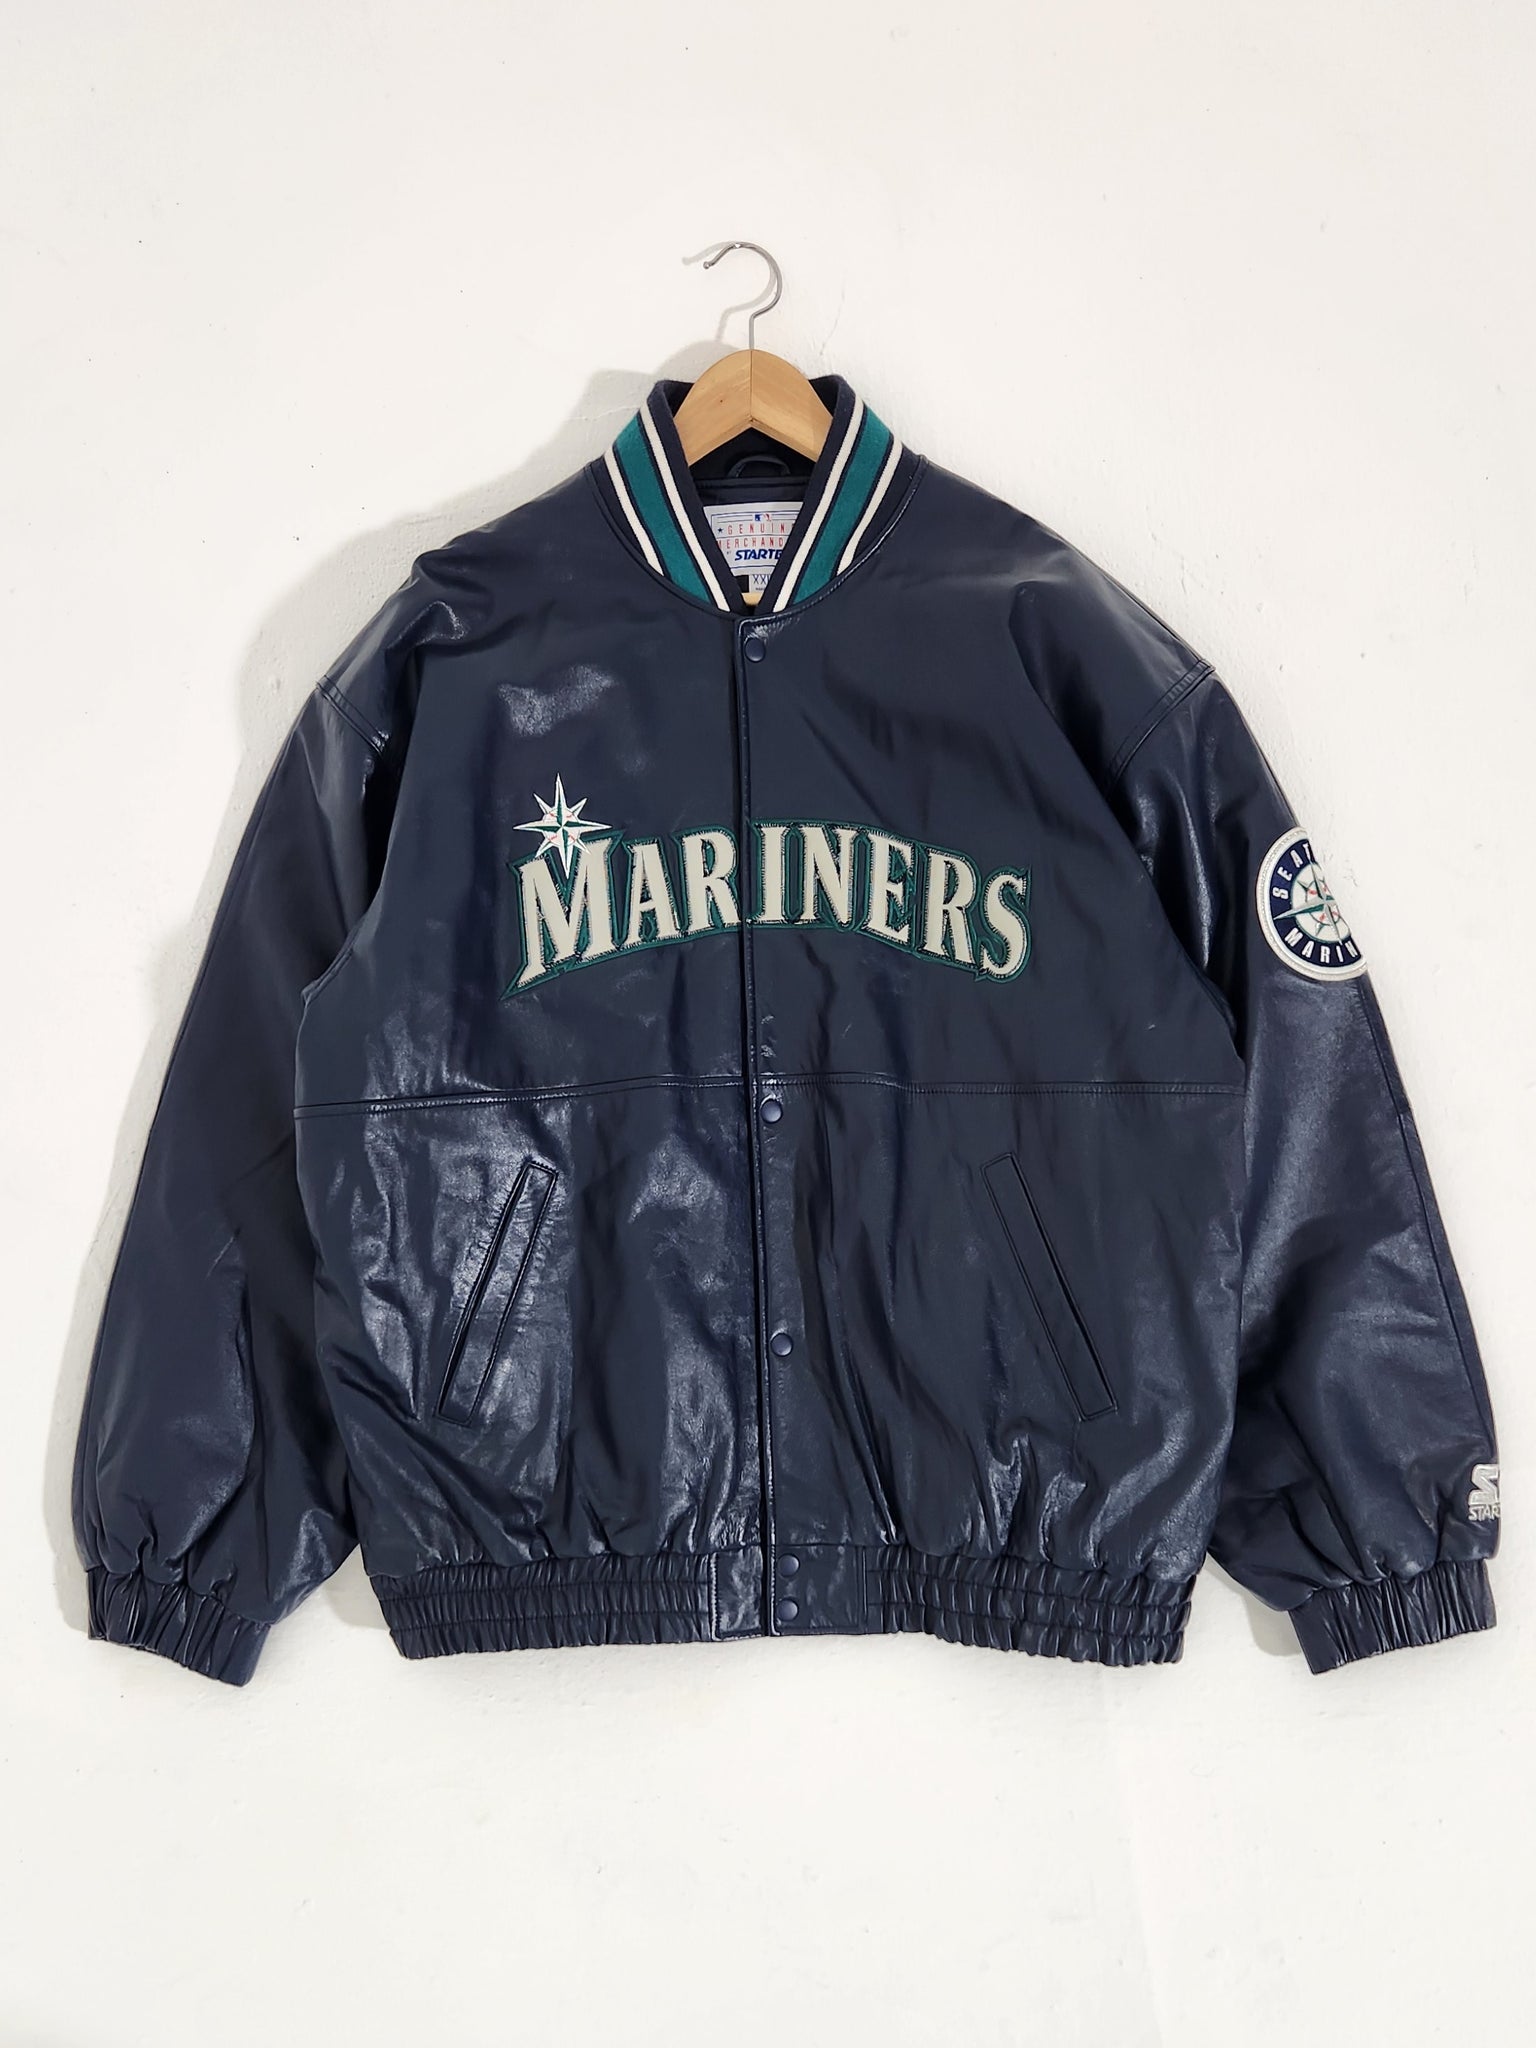 Seattle Mariners Starter jacket from the '90s, Olympus digi…